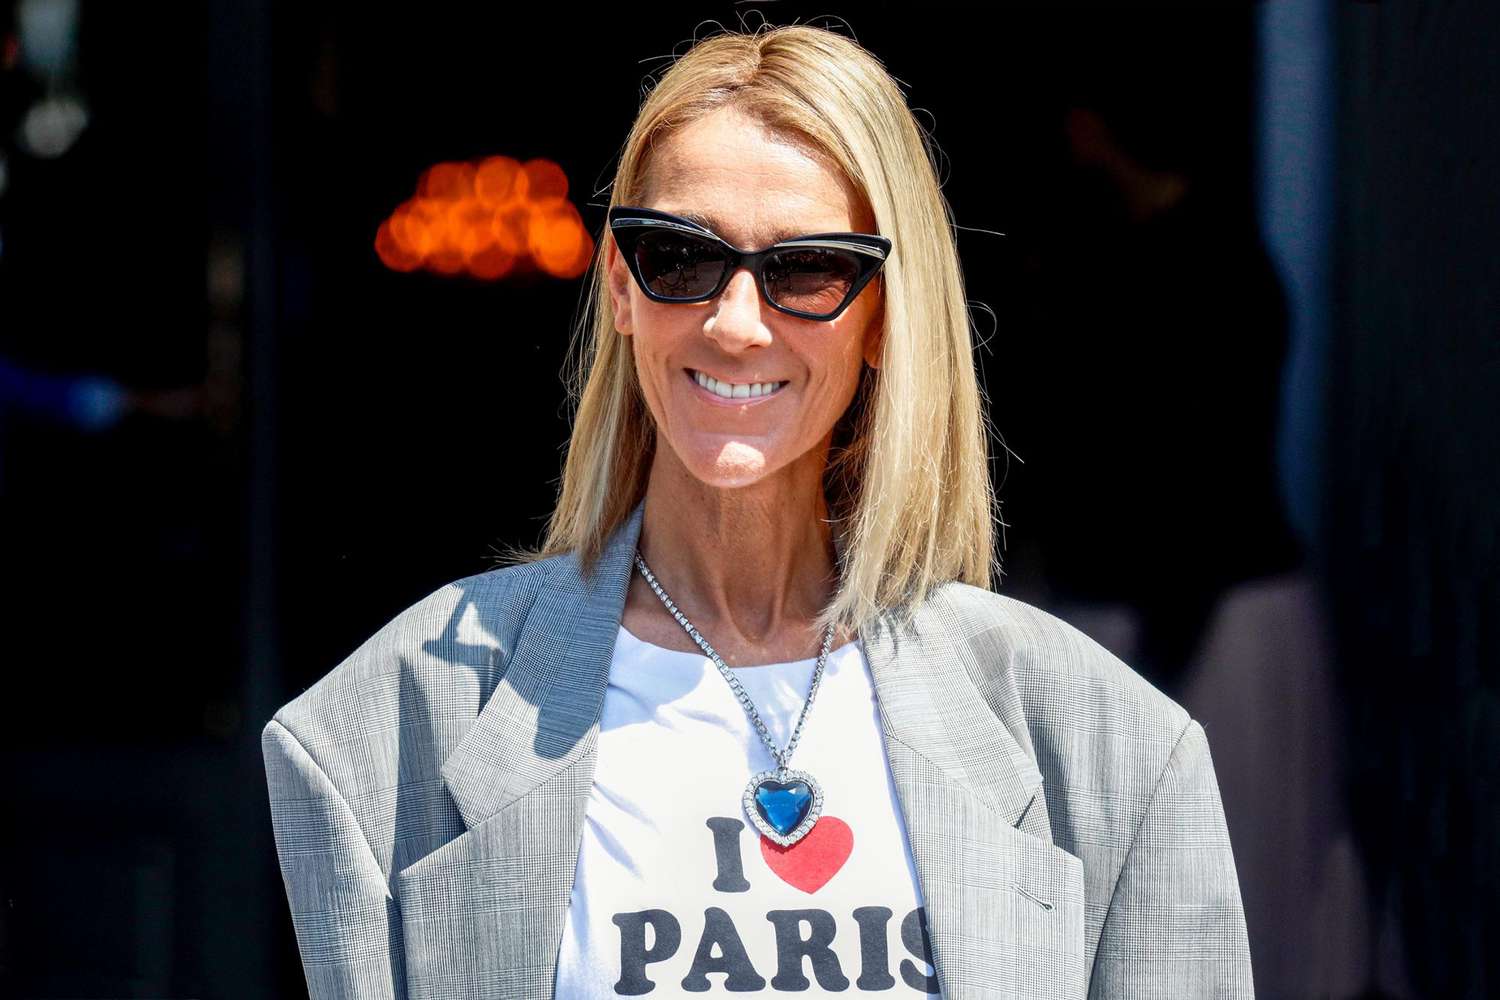 Singer Celine Dion is seen leaving her hotel in Paris, France, on July 3rd, 2019. (Photo by Mehdi Taamallah/NurPhoto via Getty Images)